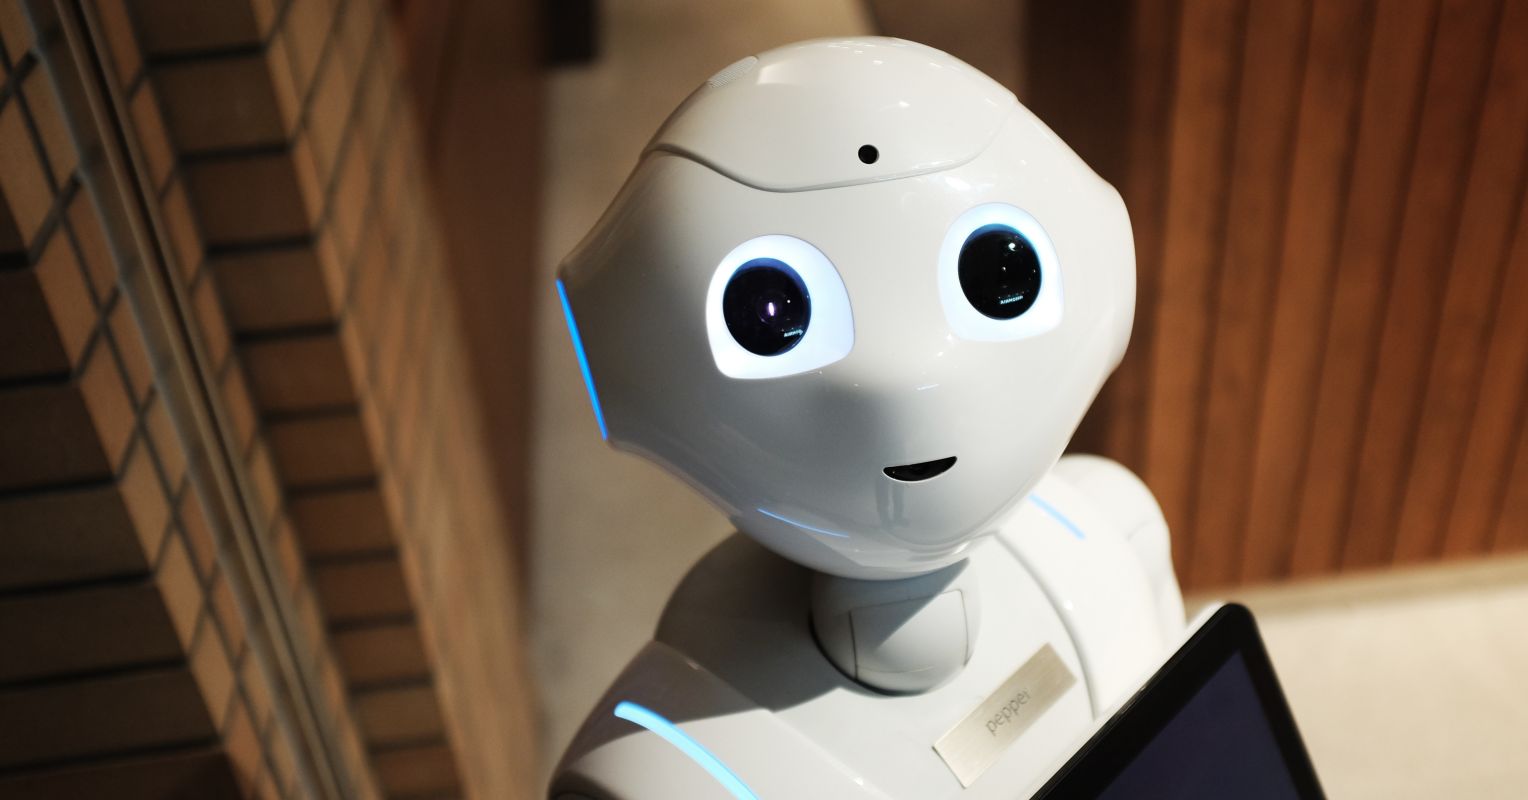 Will Future Generations Use Robots as Emotional Companions?